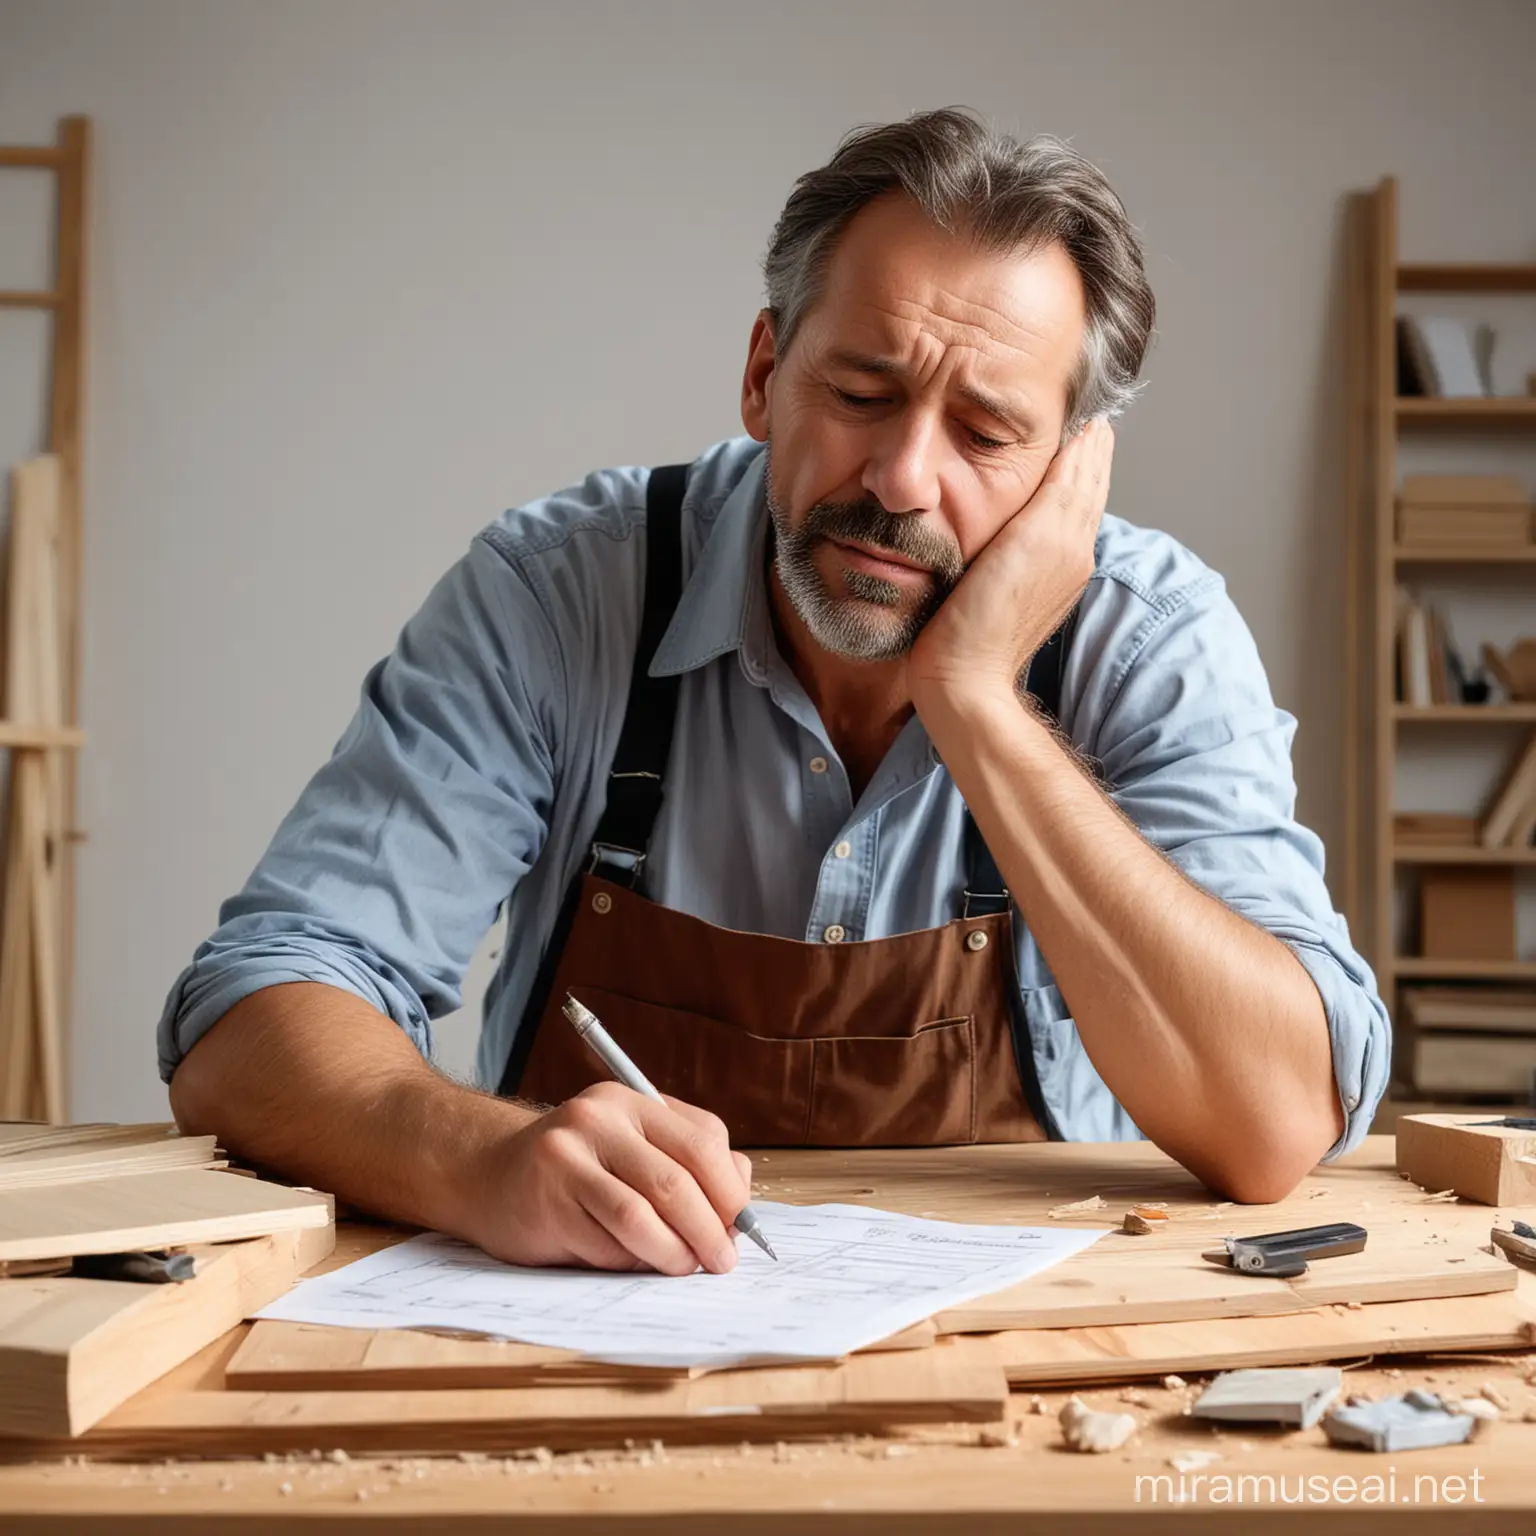 tired carpenter 50 years old stressed over paperwork

